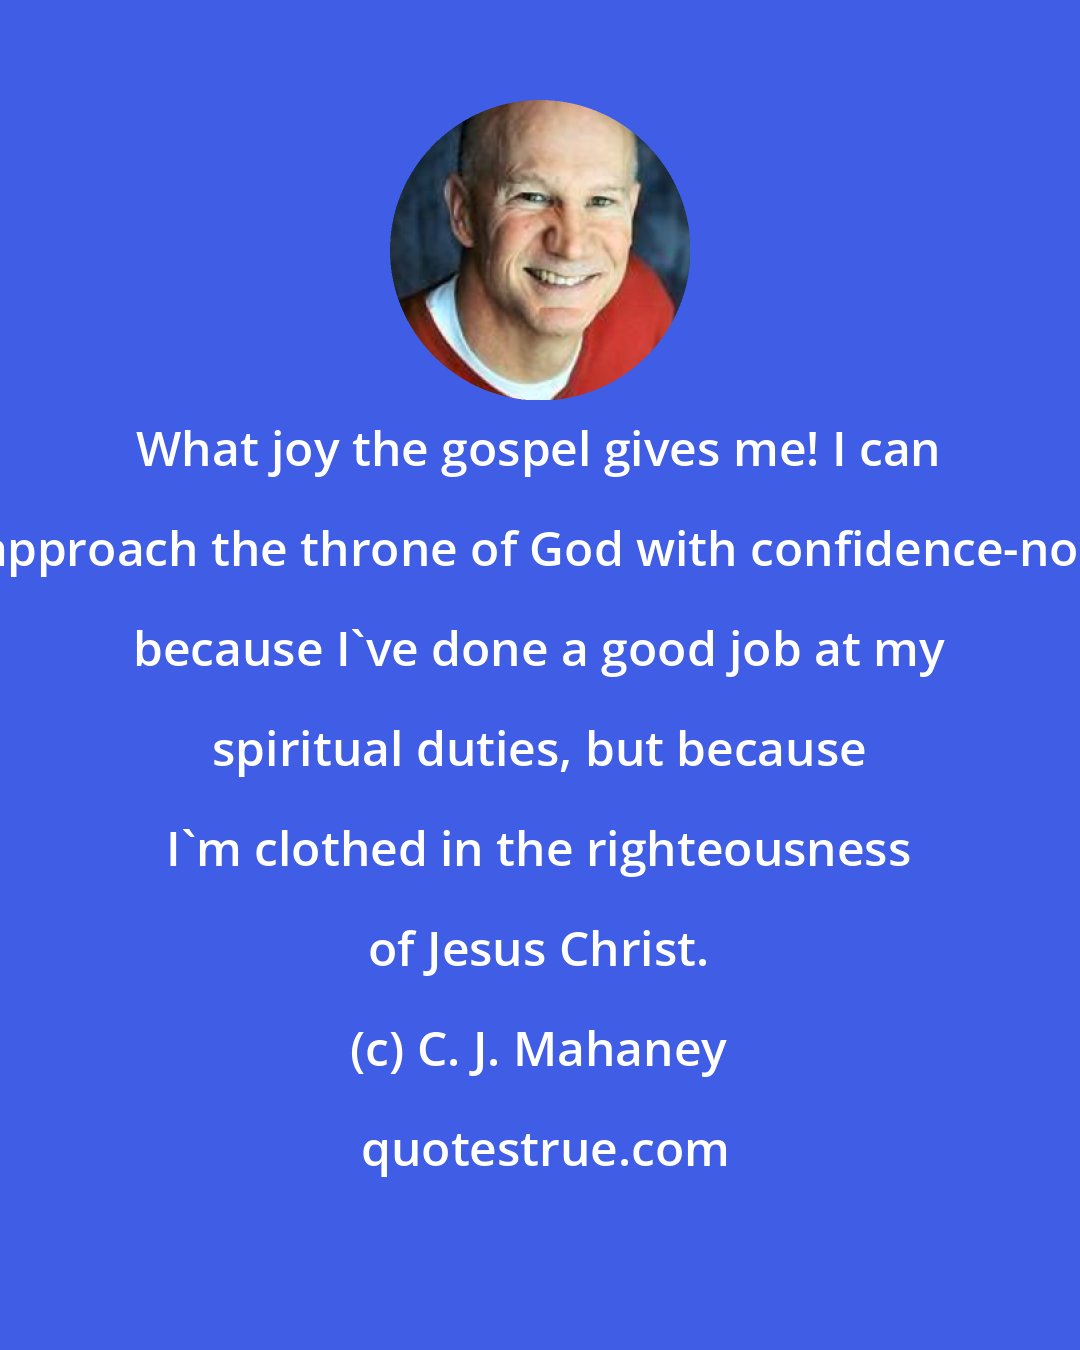 C. J. Mahaney: What joy the gospel gives me! I can approach the throne of God with confidence-not because I've done a good job at my spiritual duties, but because I'm clothed in the righteousness of Jesus Christ.